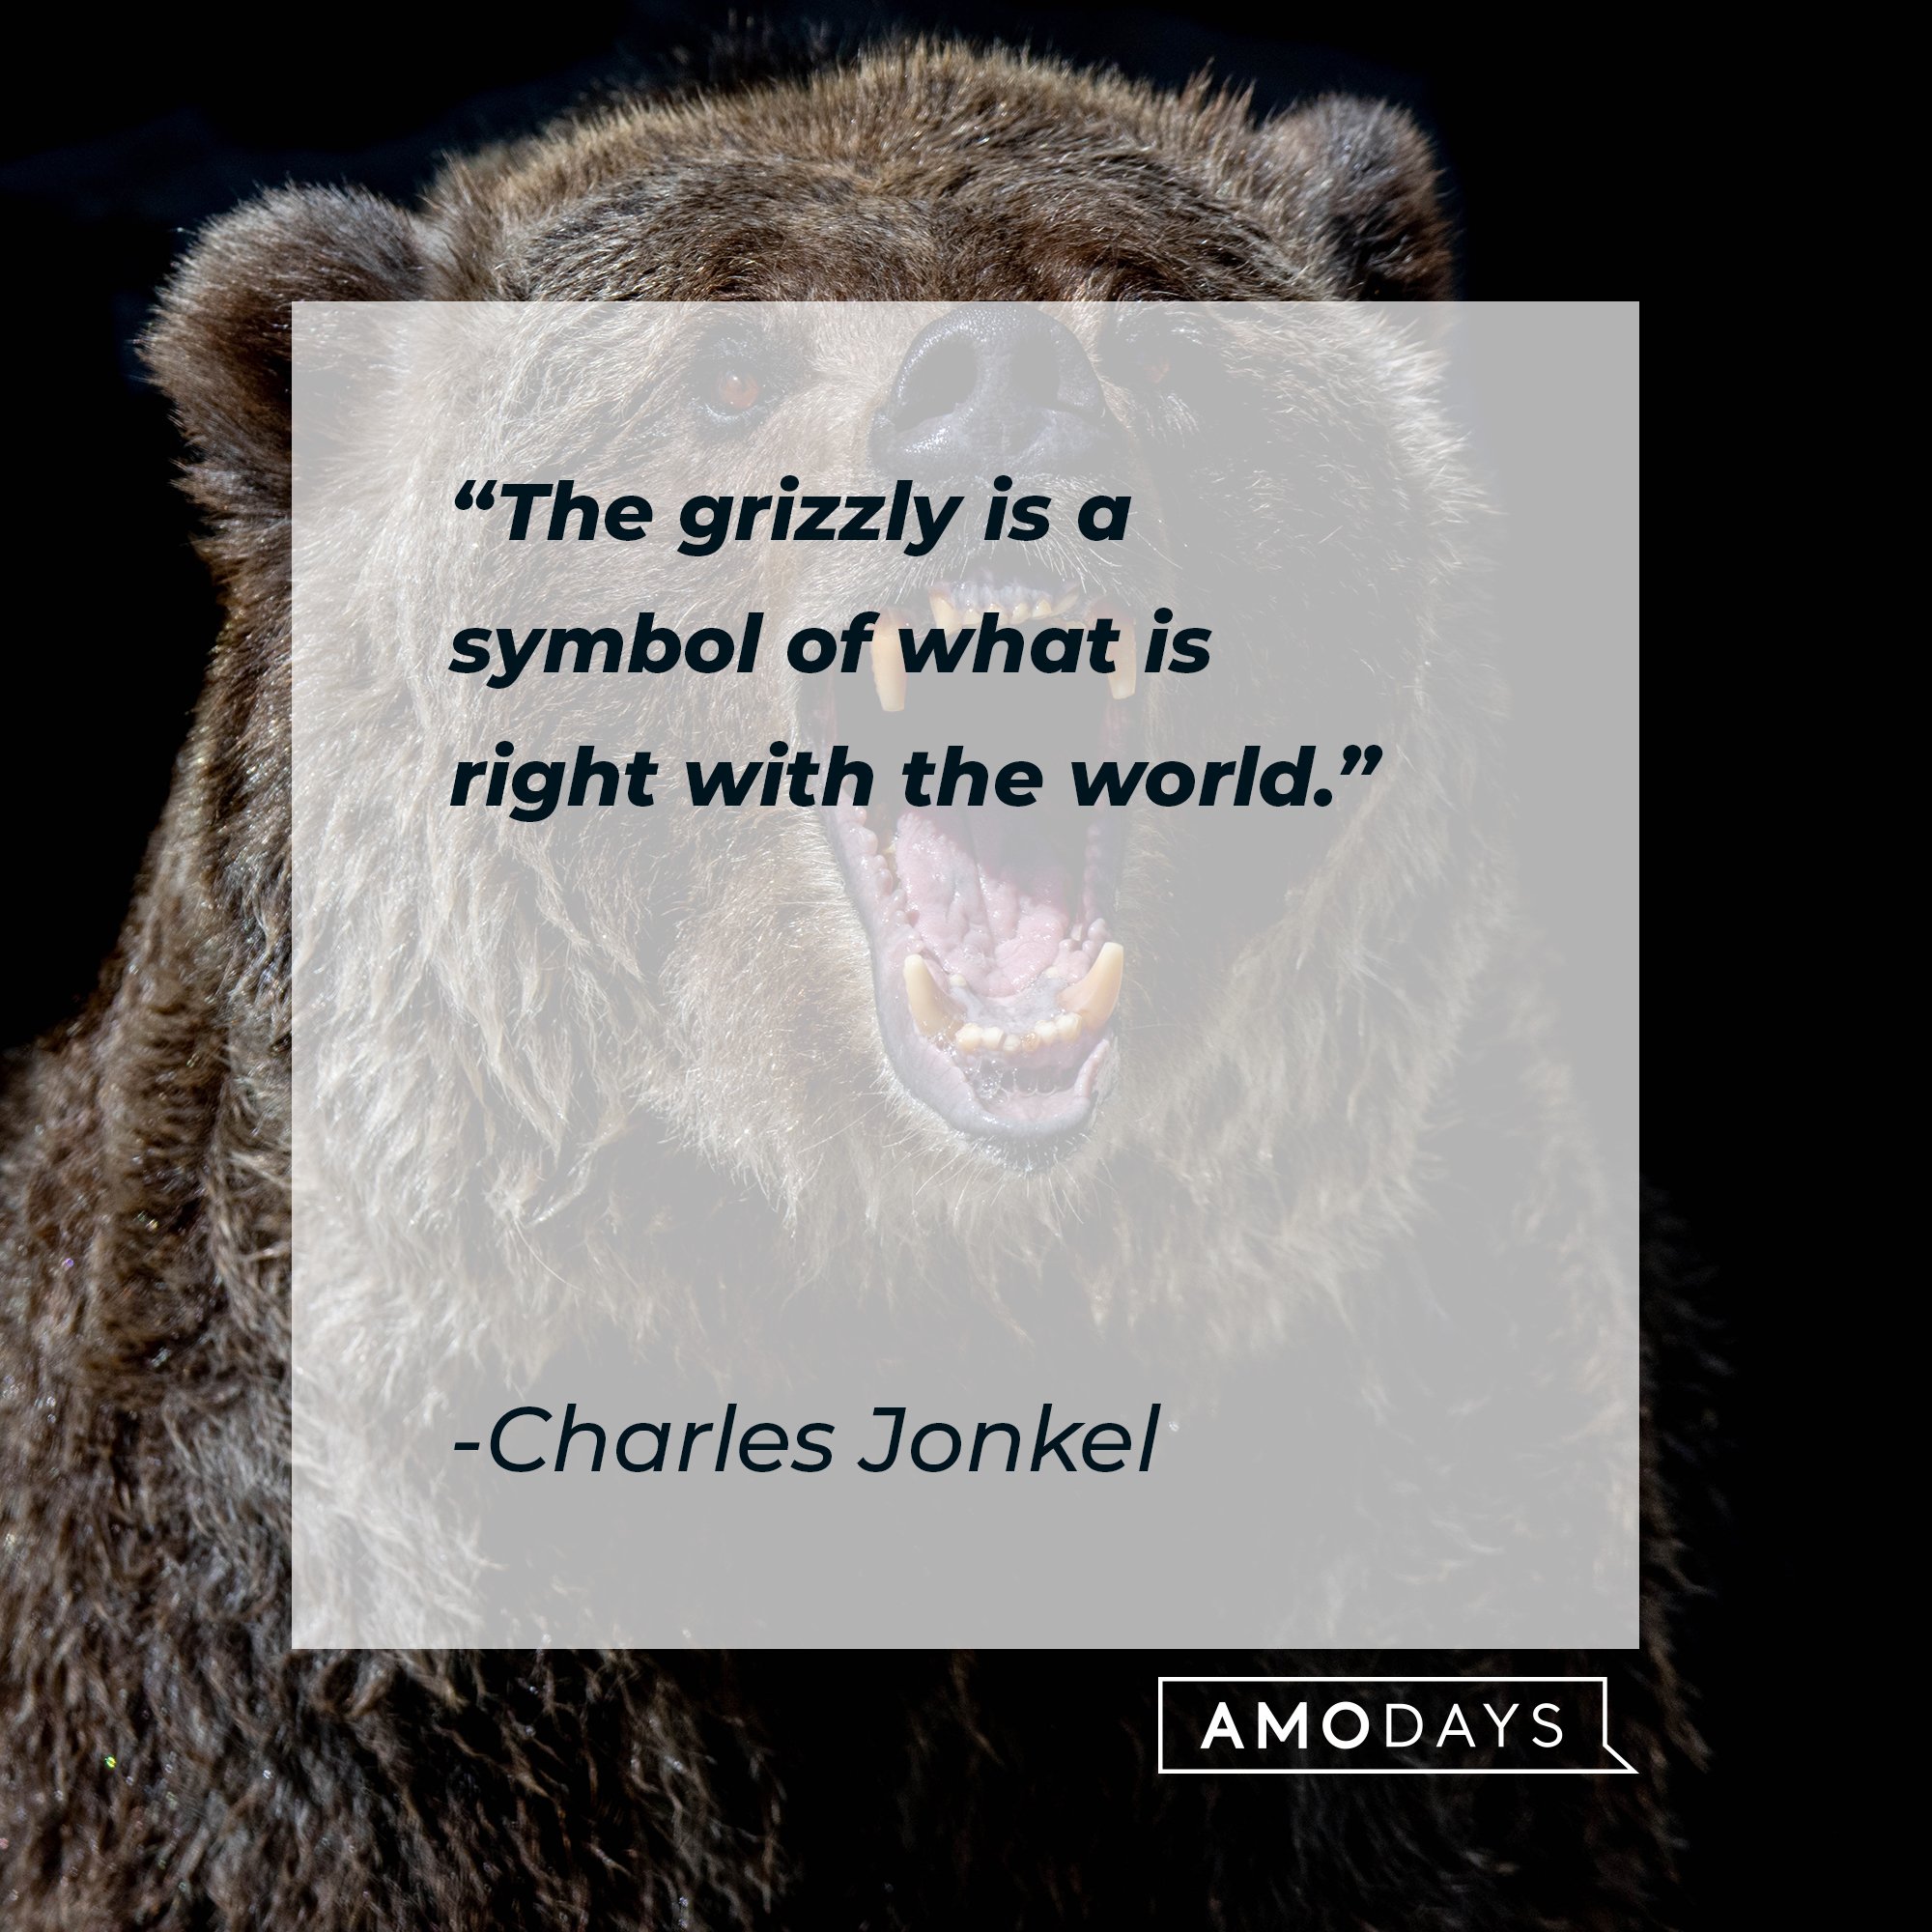 Charles Jonkel’s quote: "The grizzly is a symbol of what is right with the world." | Image: AmoDays